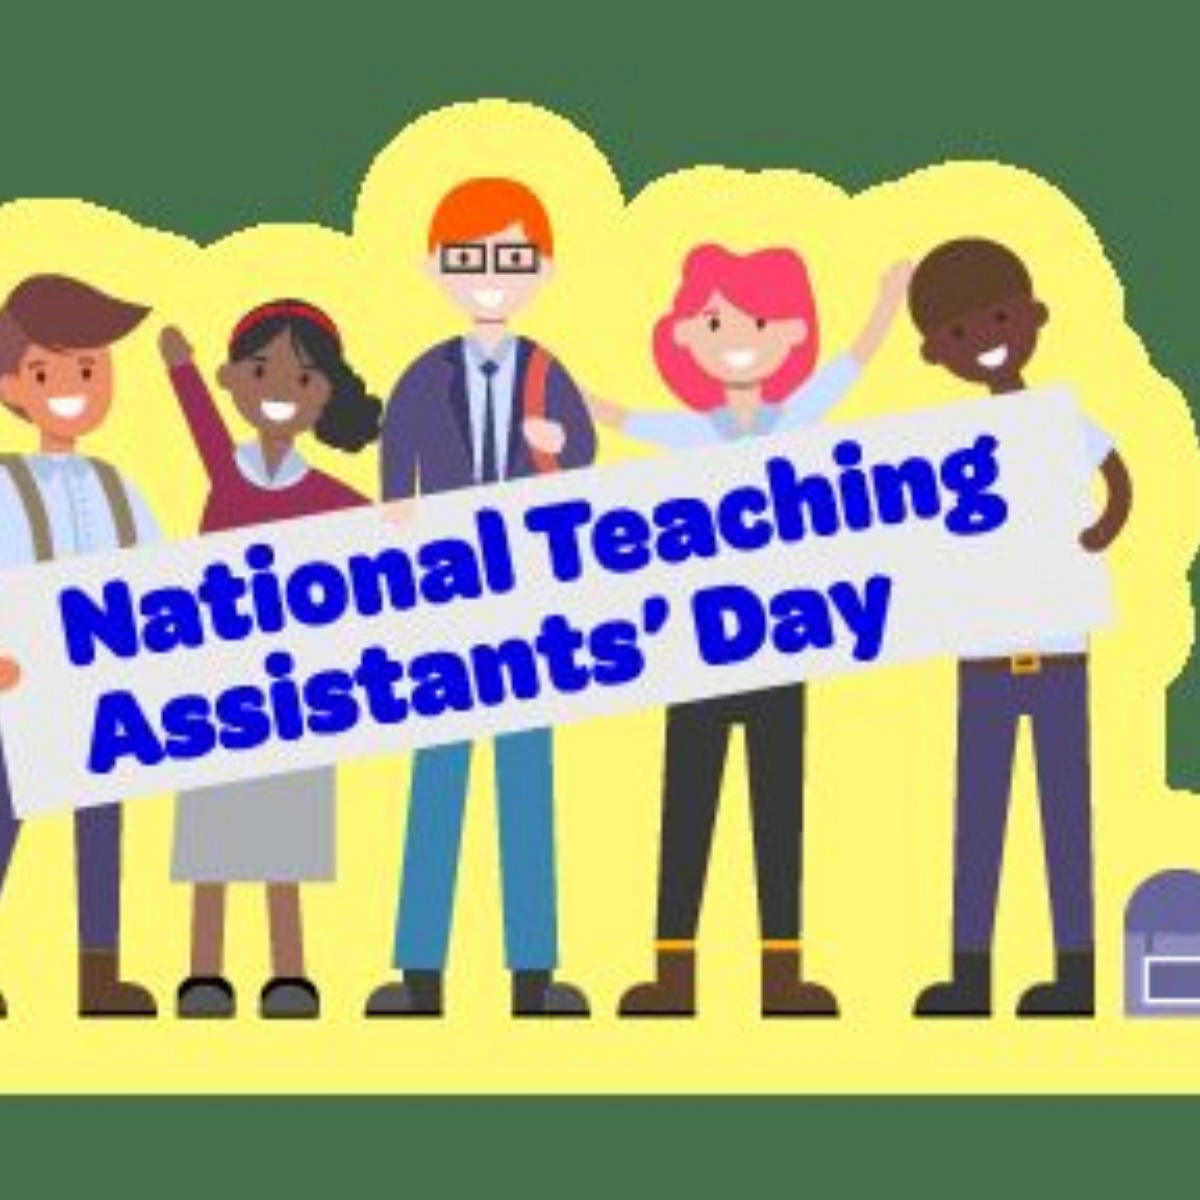 Linden Lodge School National Teaching Assistants’ Day